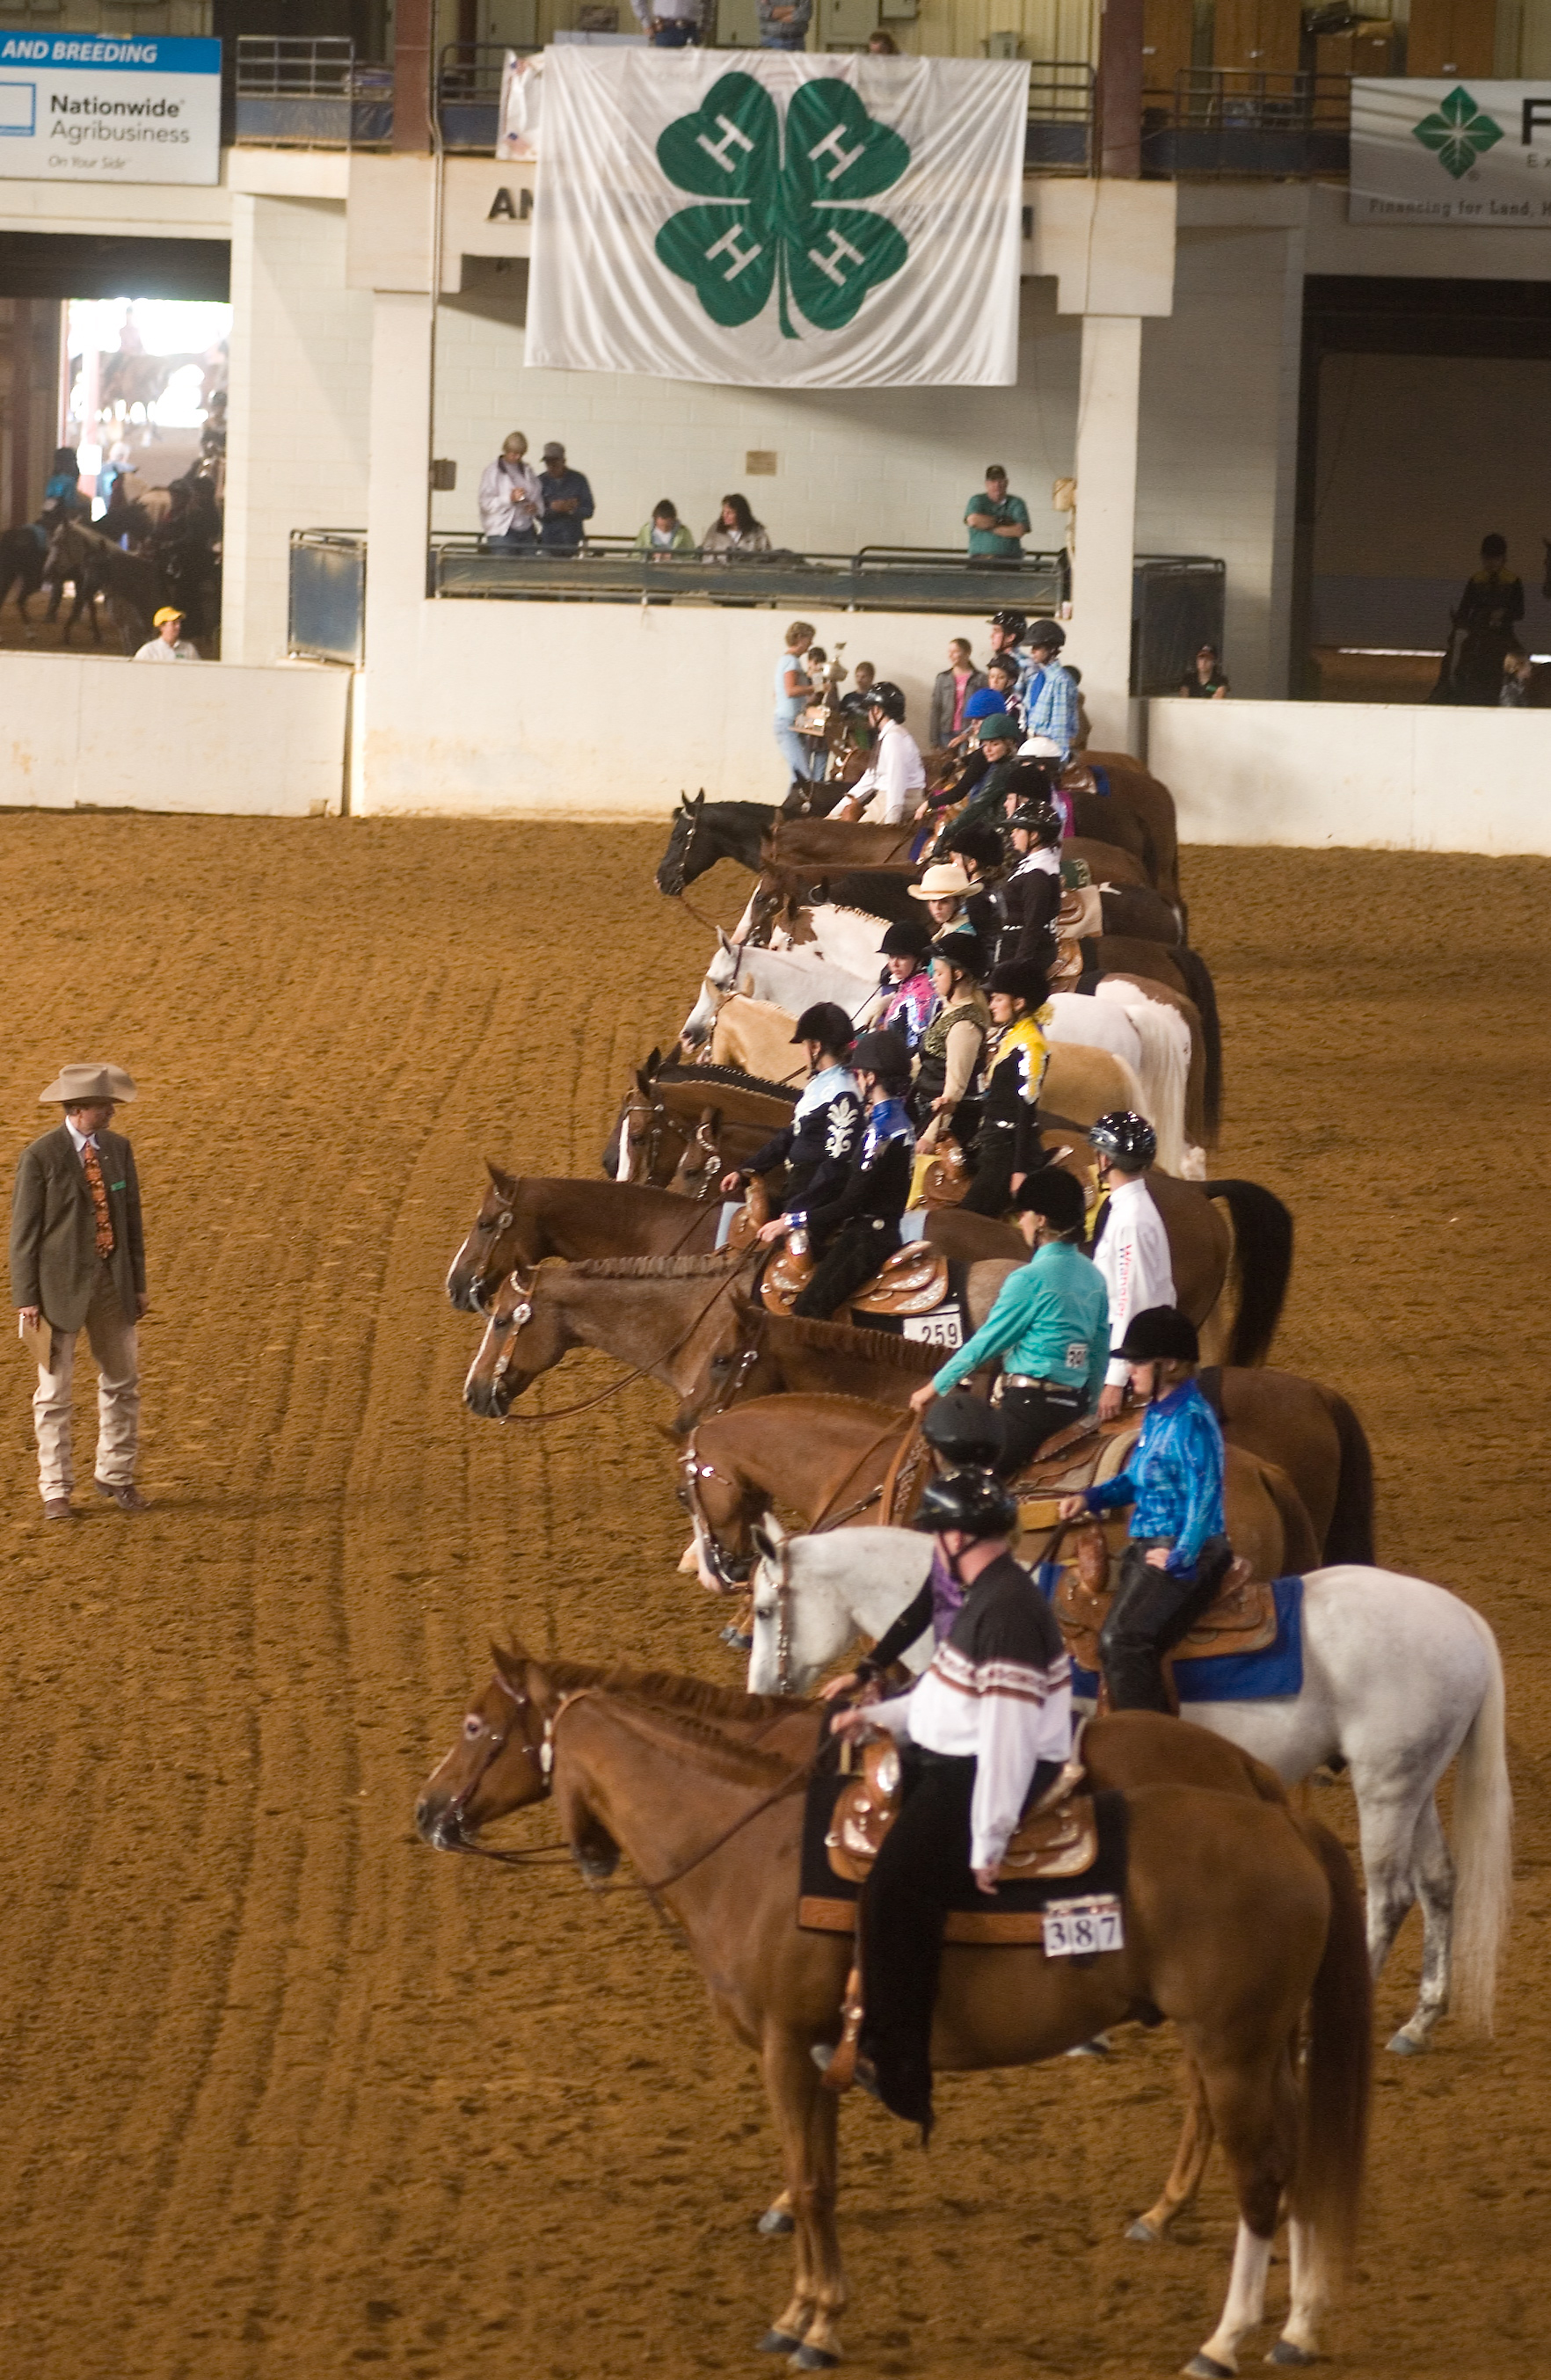 4-H members showing their horses at the State 4-H Horse Show.